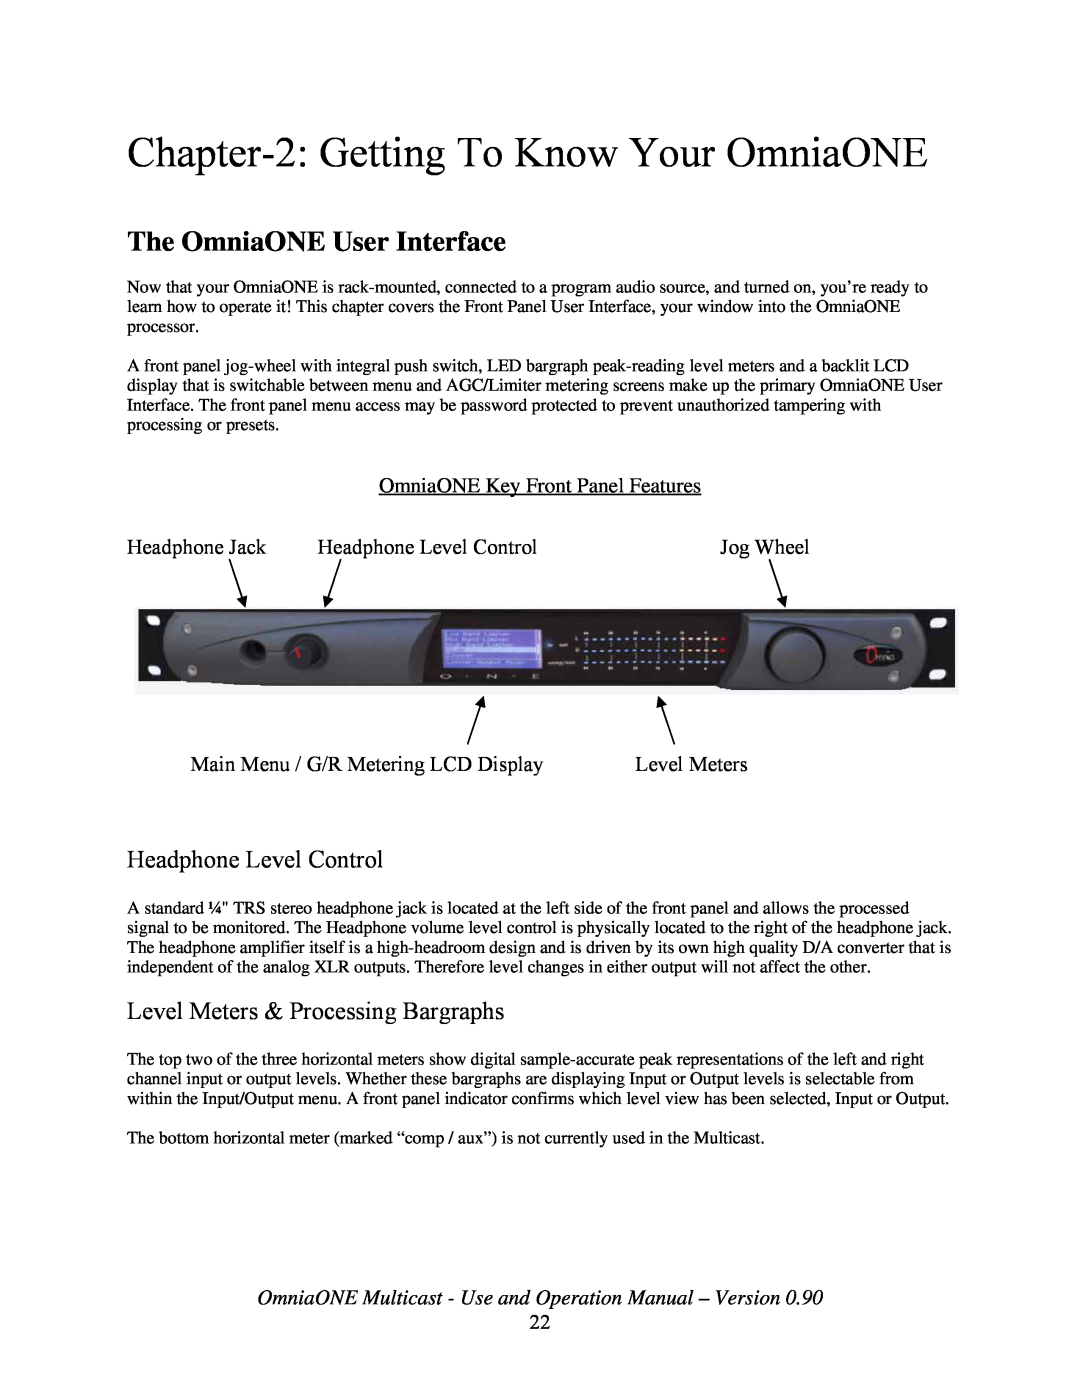 New Media Technology Omnia ONE Multicast manual Getting To Know Your OmniaONE, The OmniaONE User Interface 